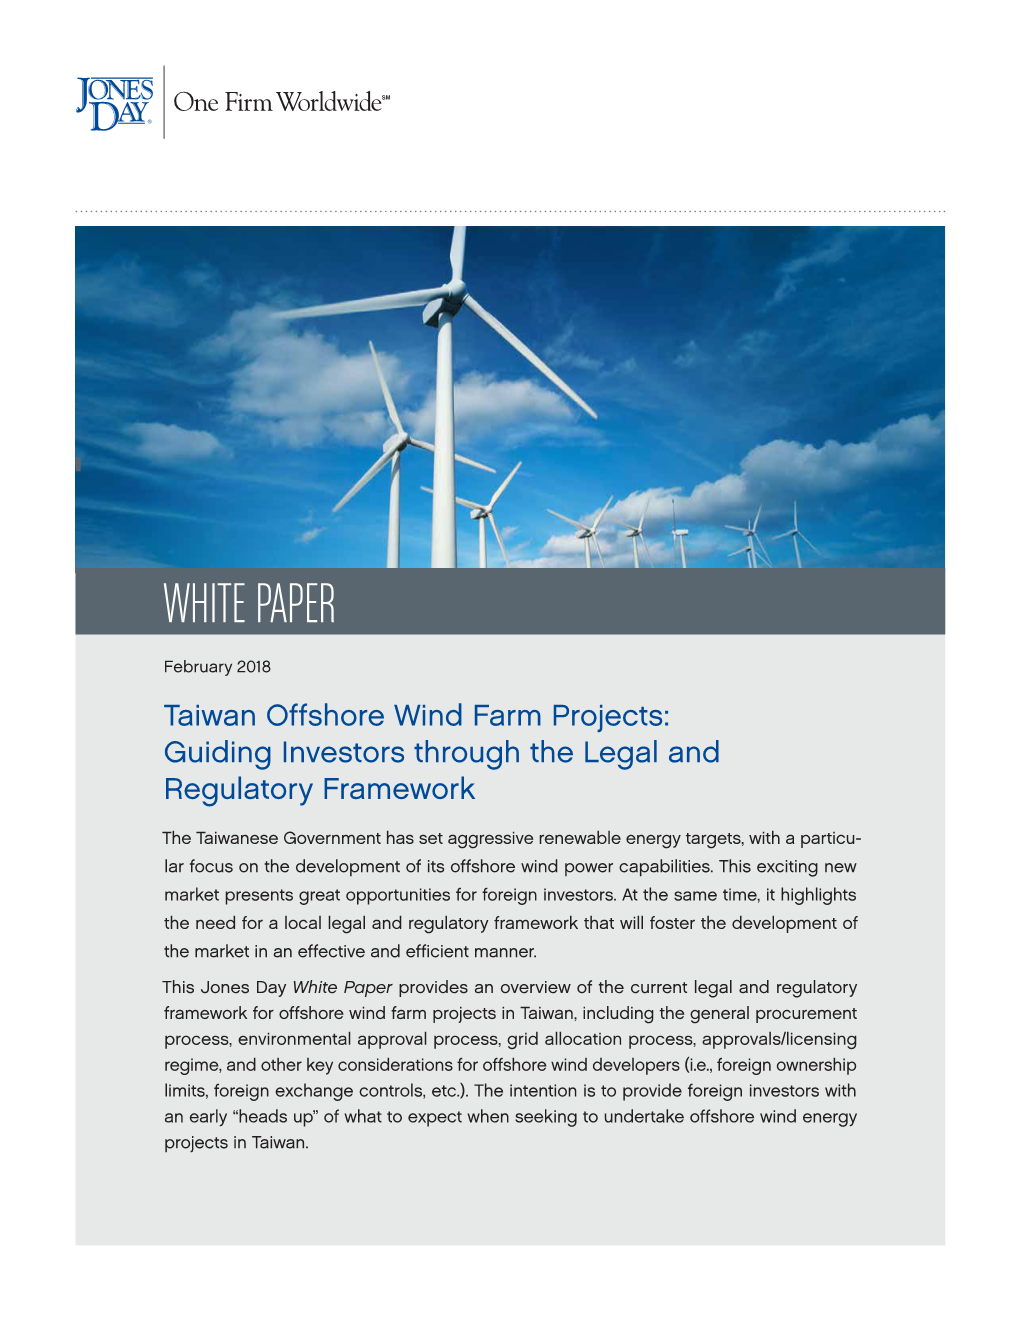 Taiwan Offshore Wind Farm Projects: Guiding Investors Through the Legal and Regulatory Framework